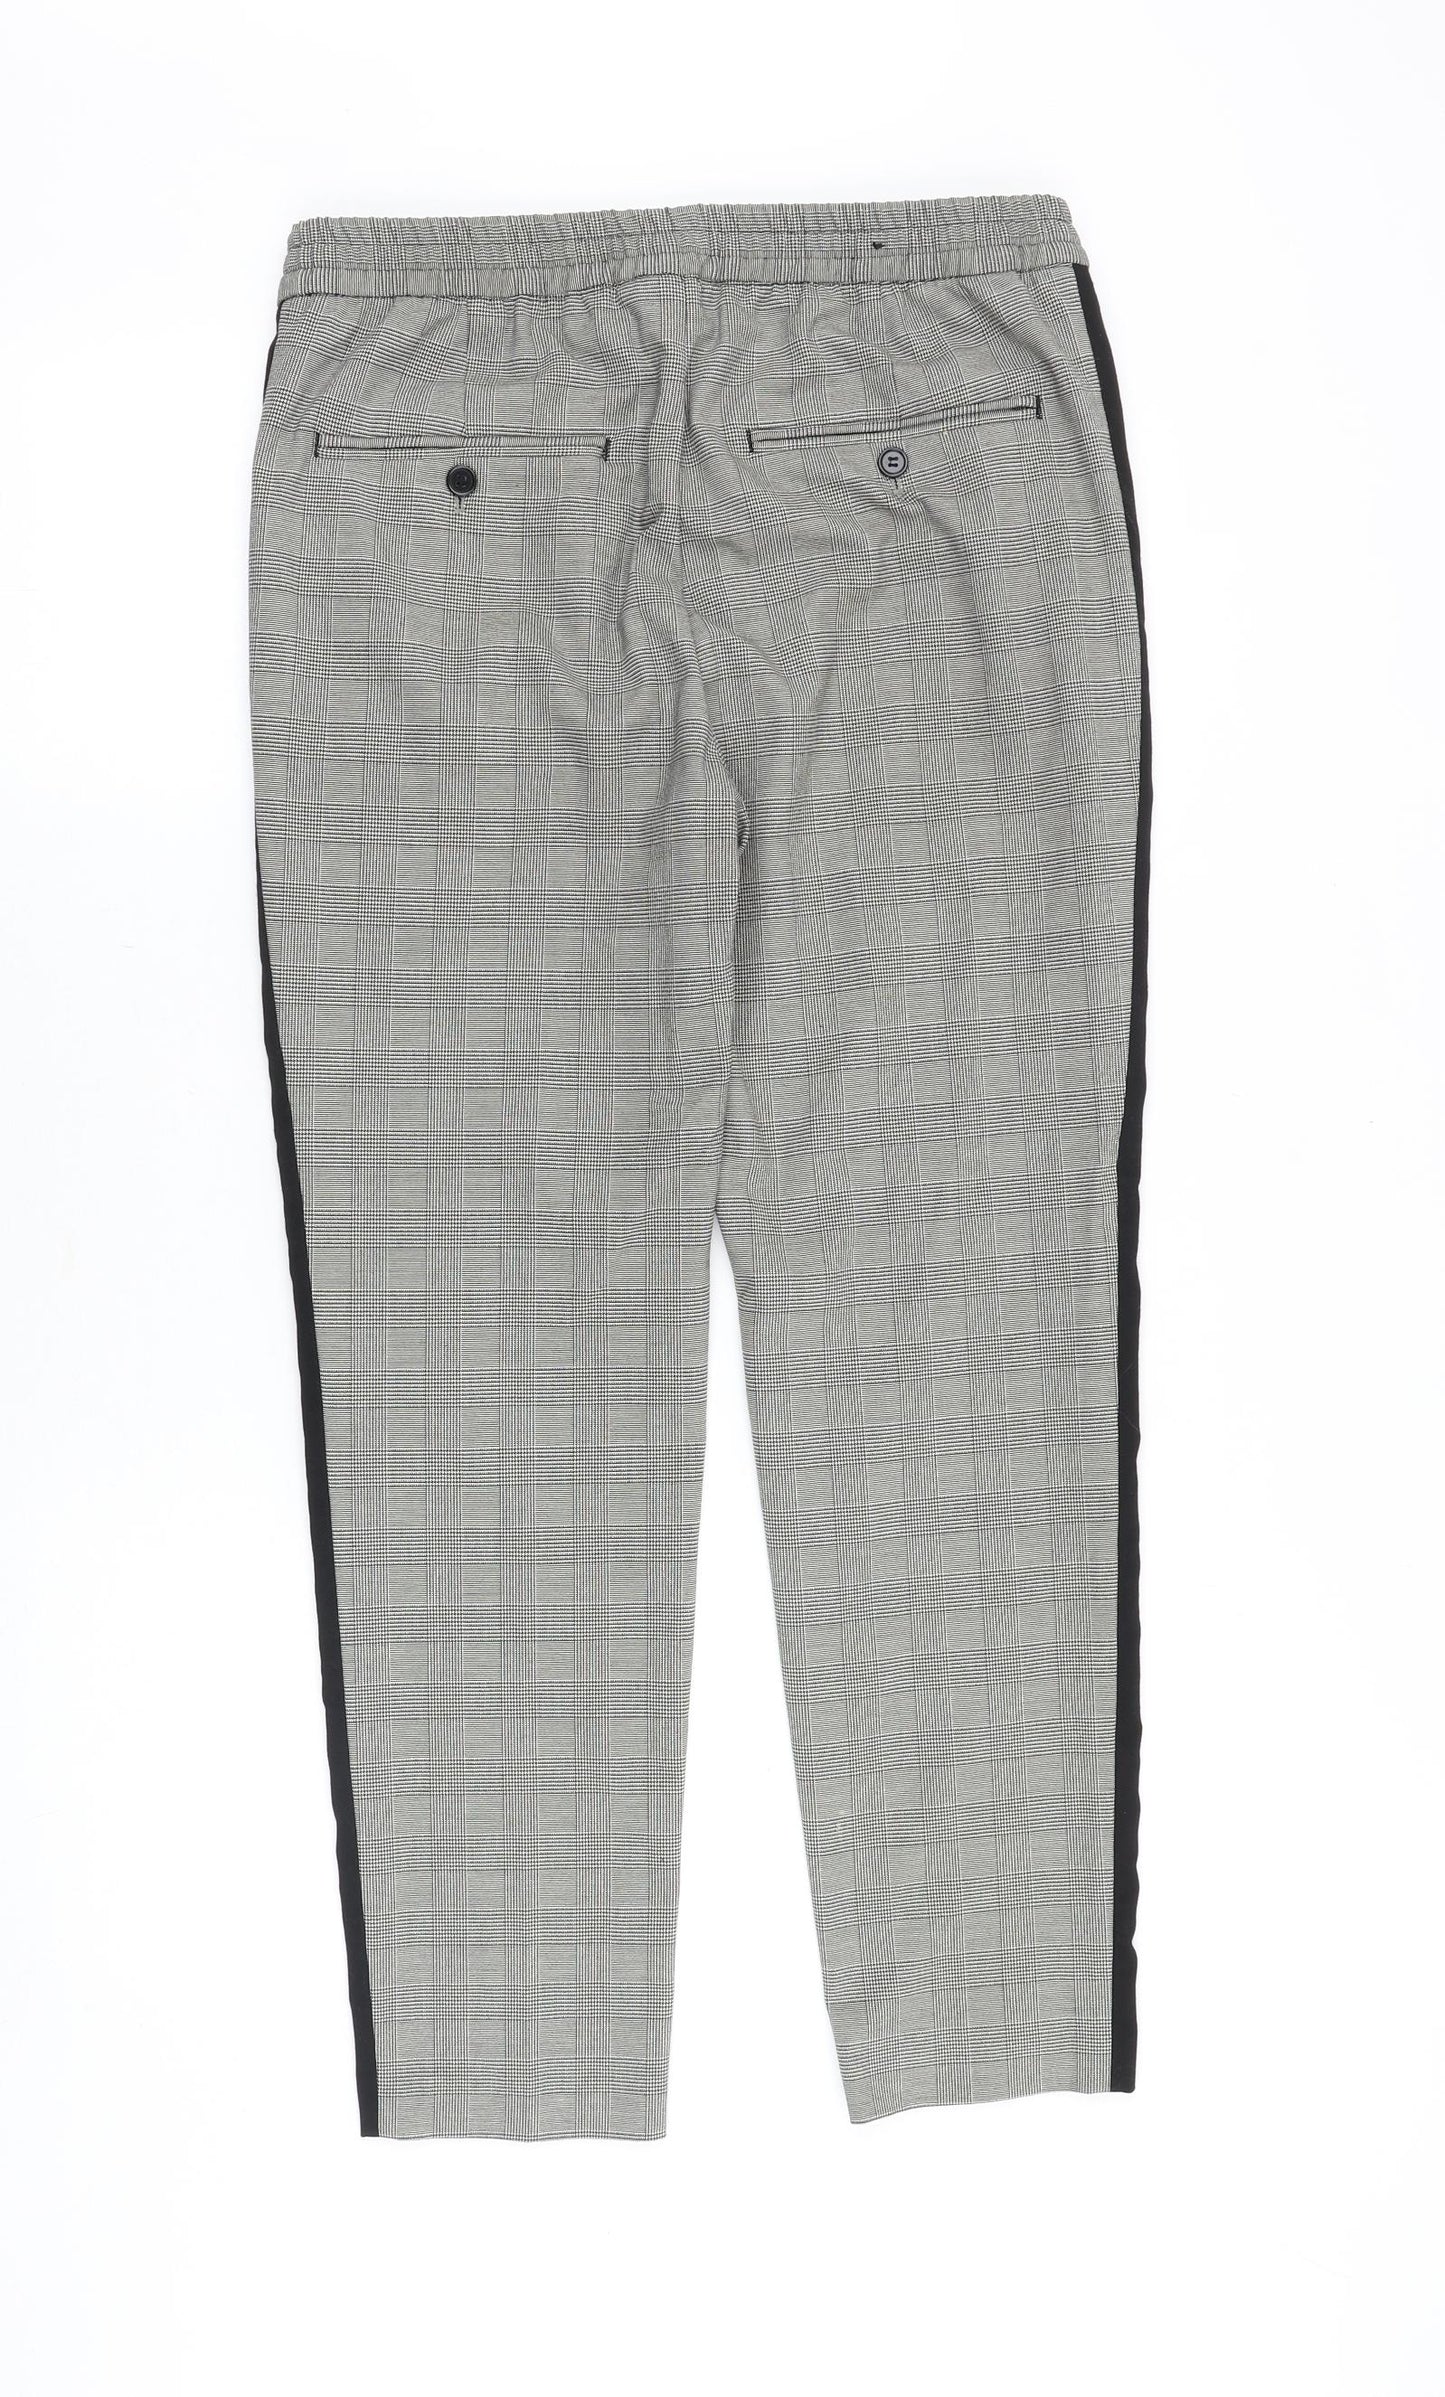 H&M Mens Grey Plaid Cotton Trousers Size 32 in Regular Zip - Side Stripe